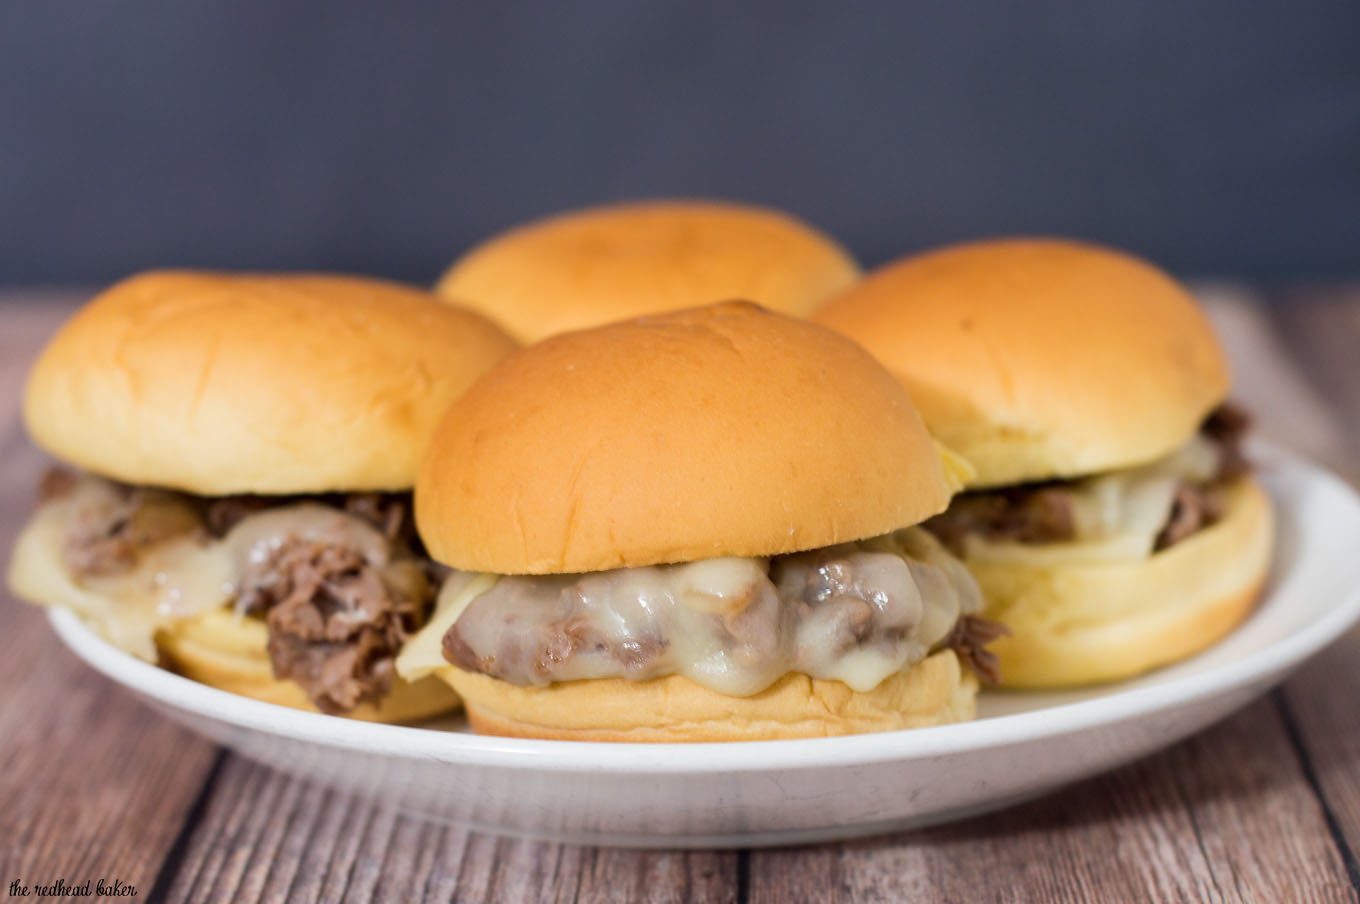 Snack on these easy Philly cheesesteak sliders, loaded with beef, fried onions, and provolone cheese at your next football party! #SundaySupper